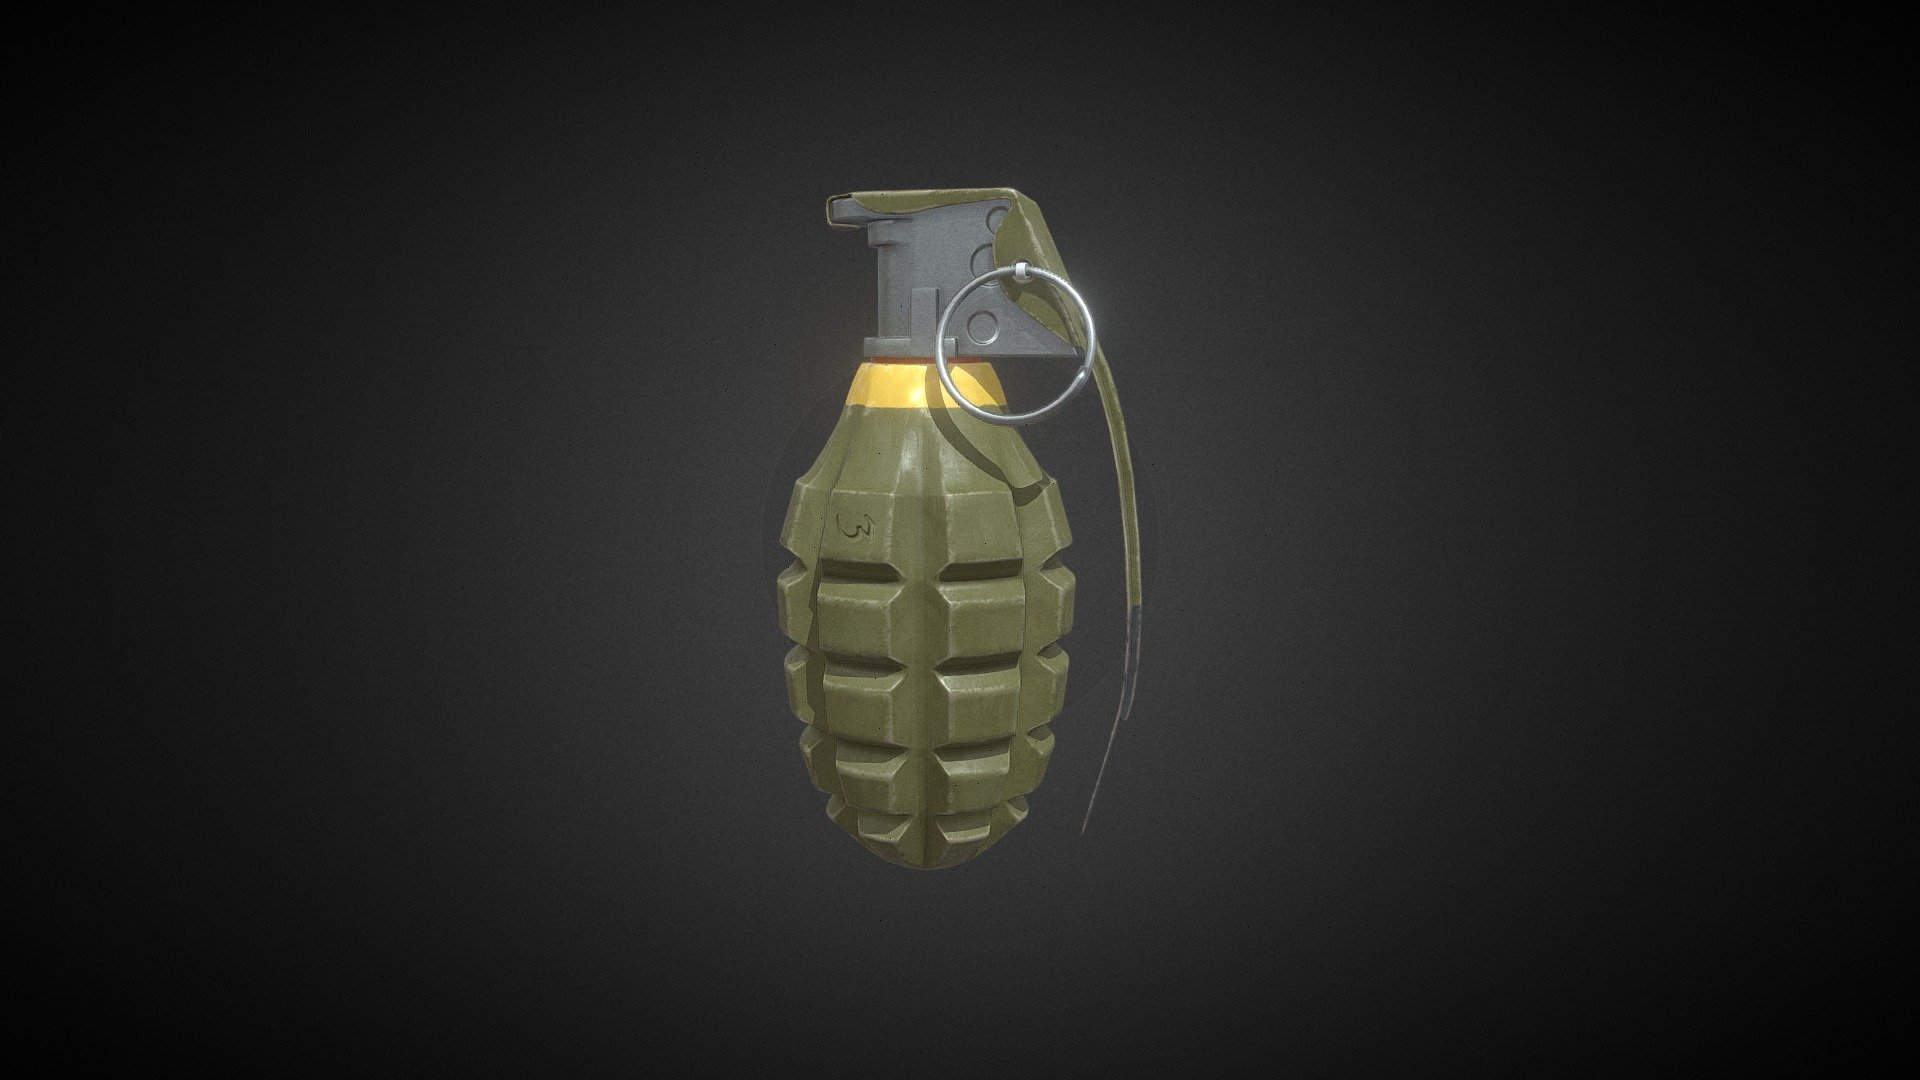 Low Poly Grenade

Texture size : 2K

Ploy Count.
Verts: 17342
Edge: 34605
Face: 17268
Tris: 34554 - Grenade - 3D model by sachin kumar (@kayozz) 3d model